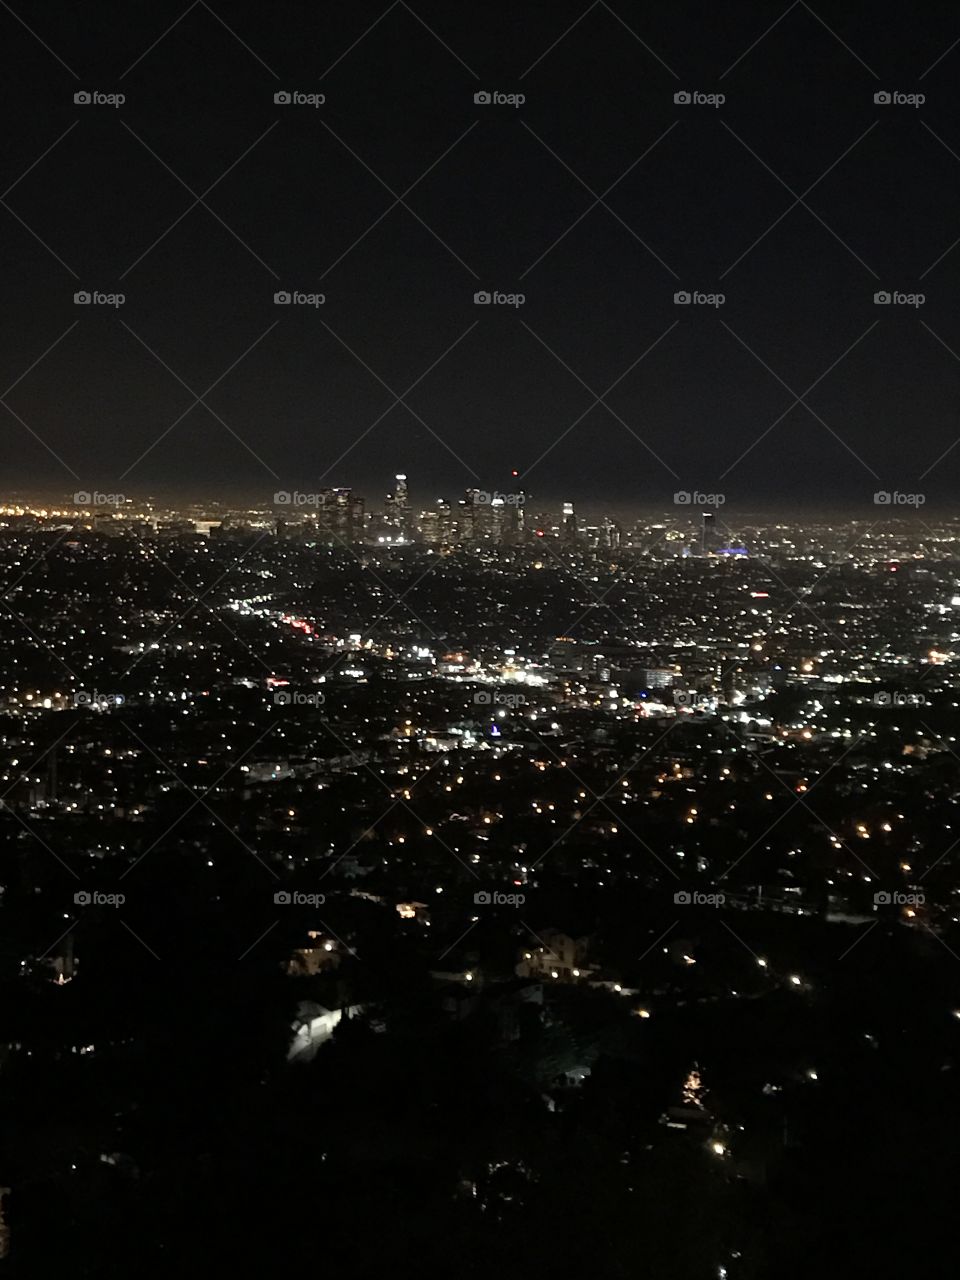 The beautifully twinkling skyline taken from the Griffith Park Observatory. The scattered lights give way to a glowing horizon and the night sky.